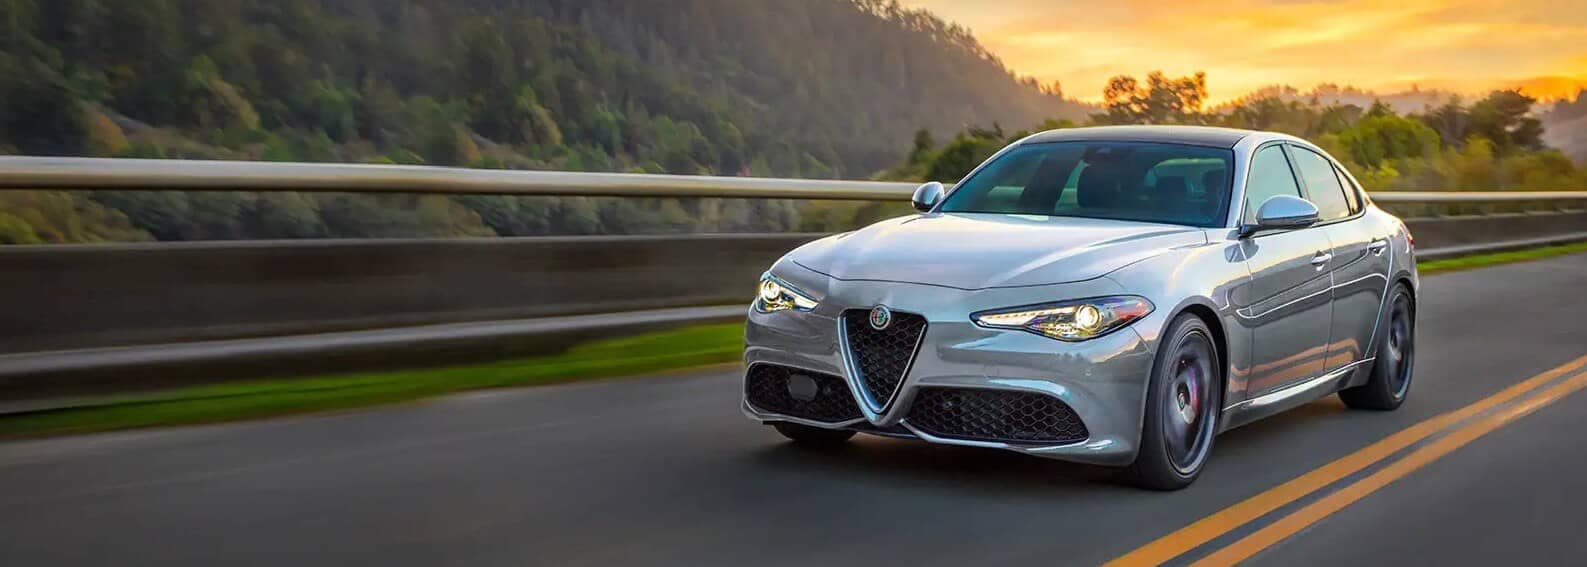 2021 Alfa Romeo Giulia shown above with available options